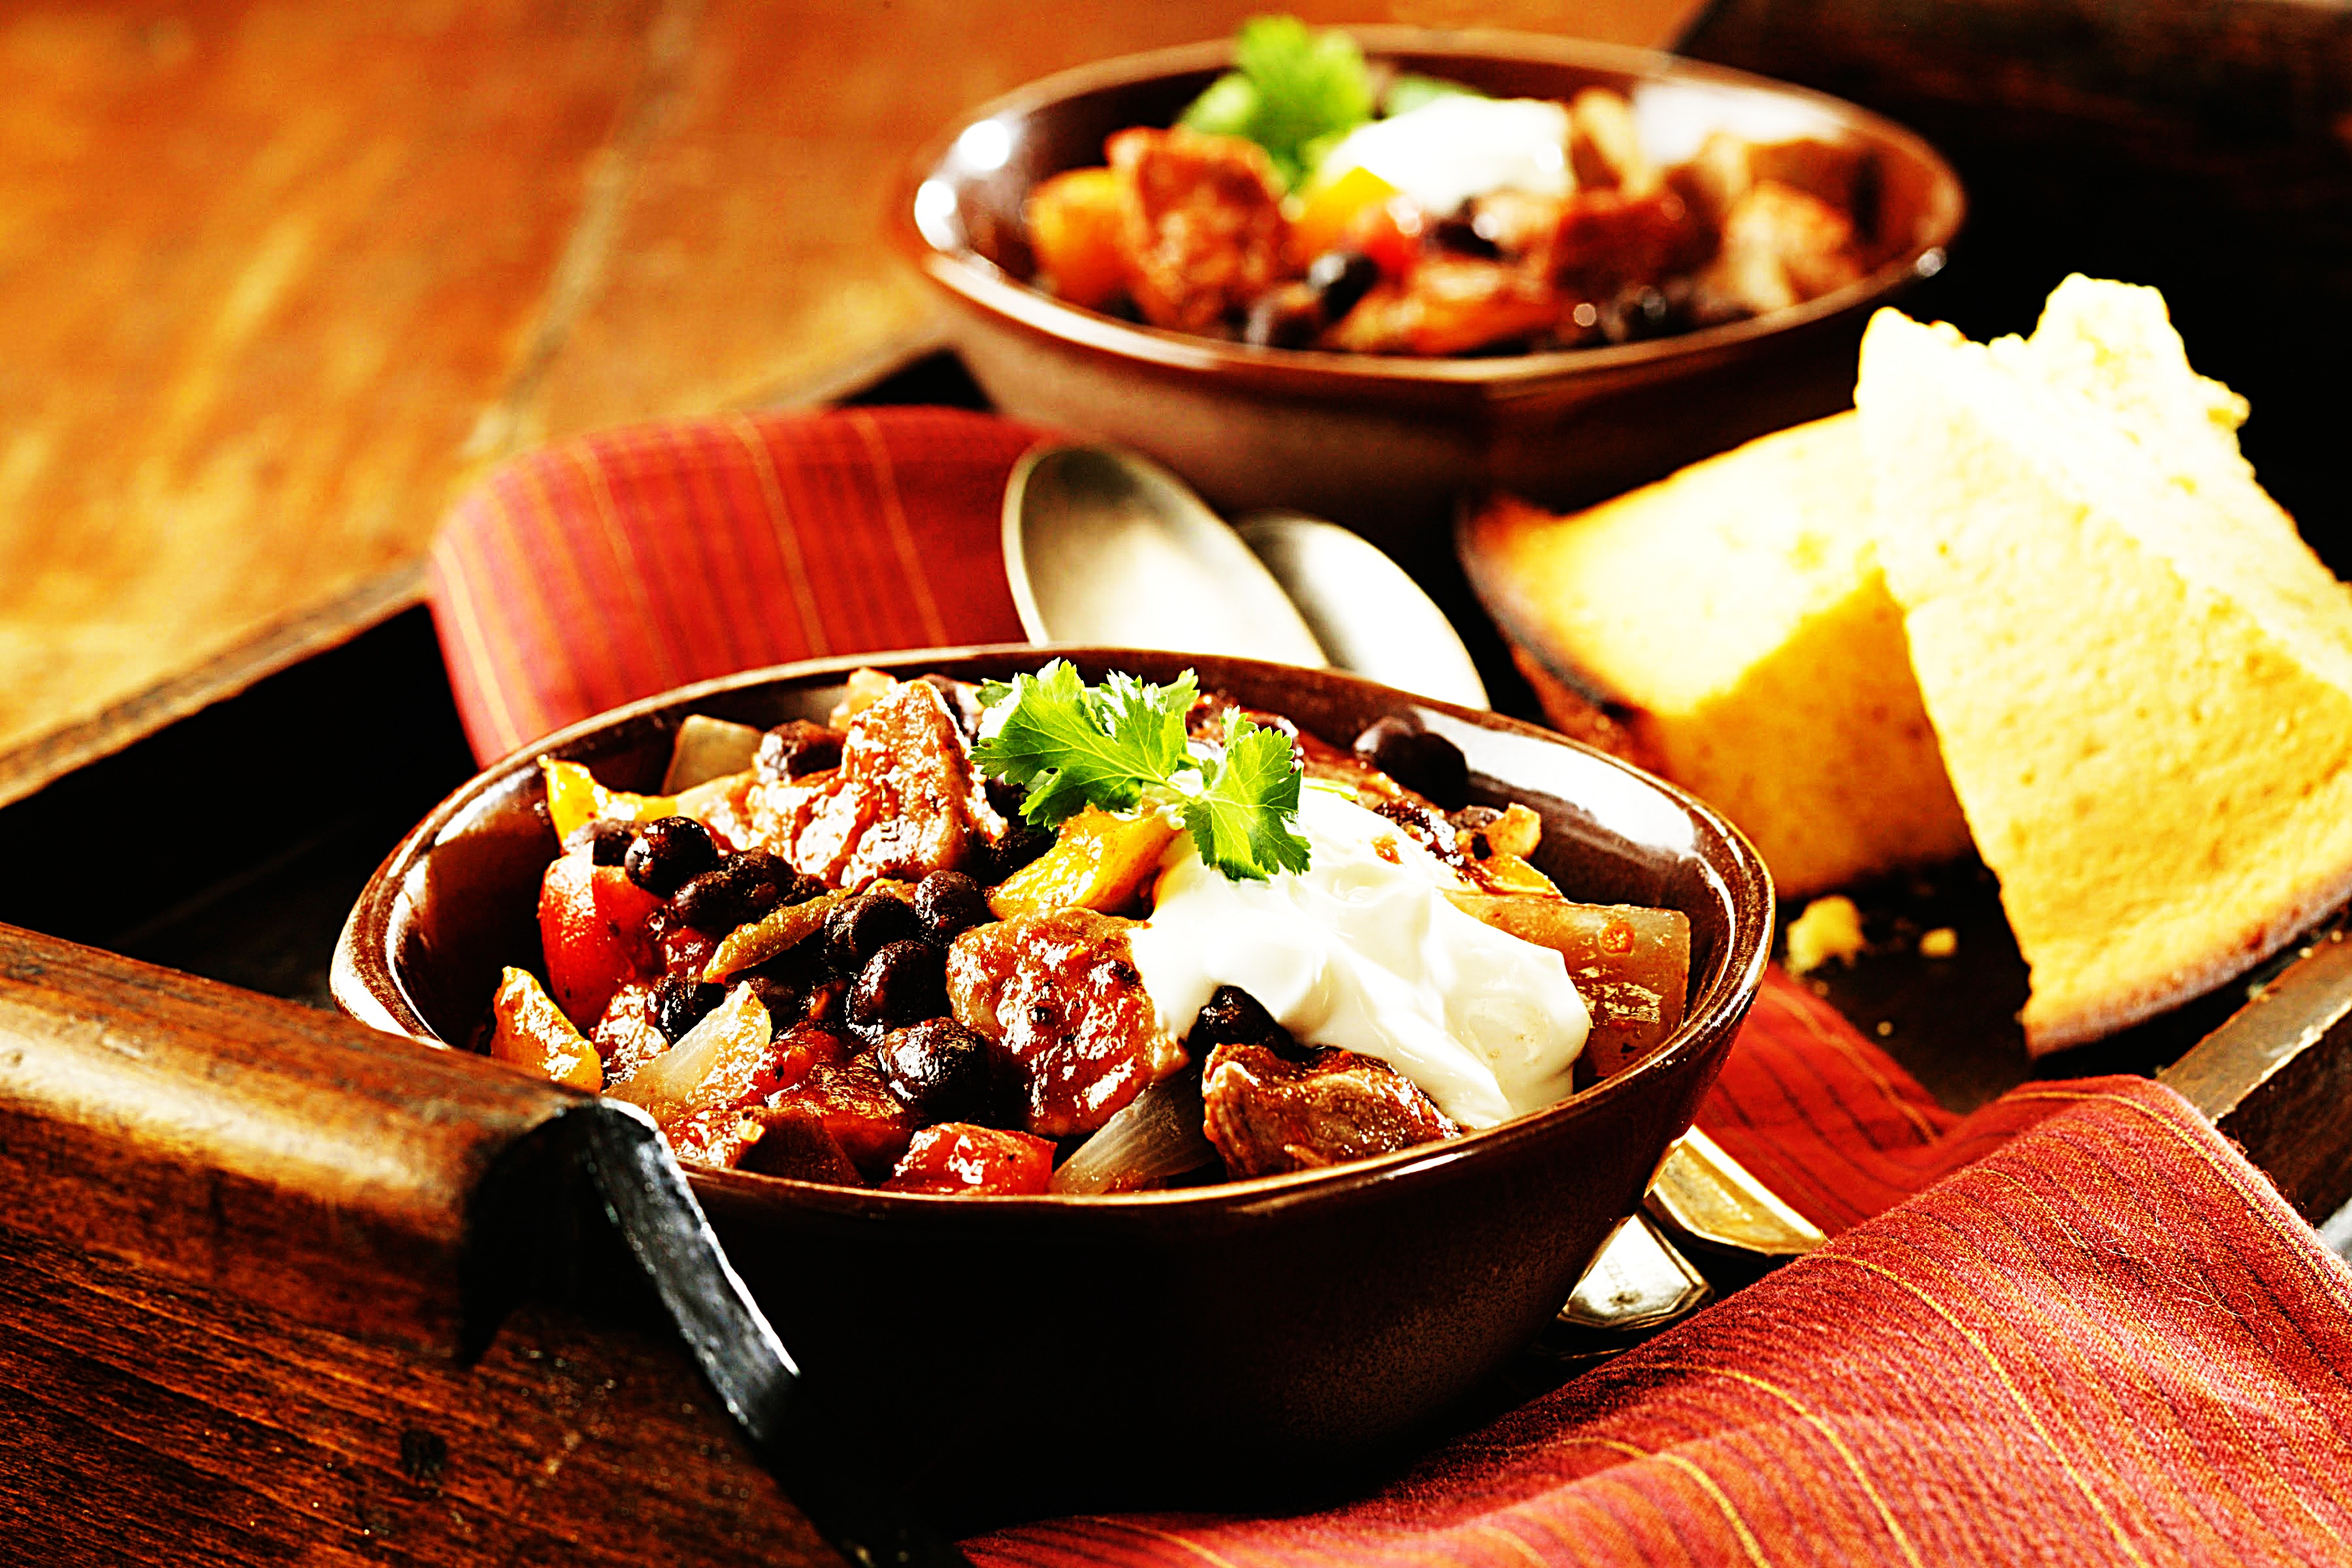 Stupid-Easy Recipe for Black Bean Chili (#1 Top-Rated)